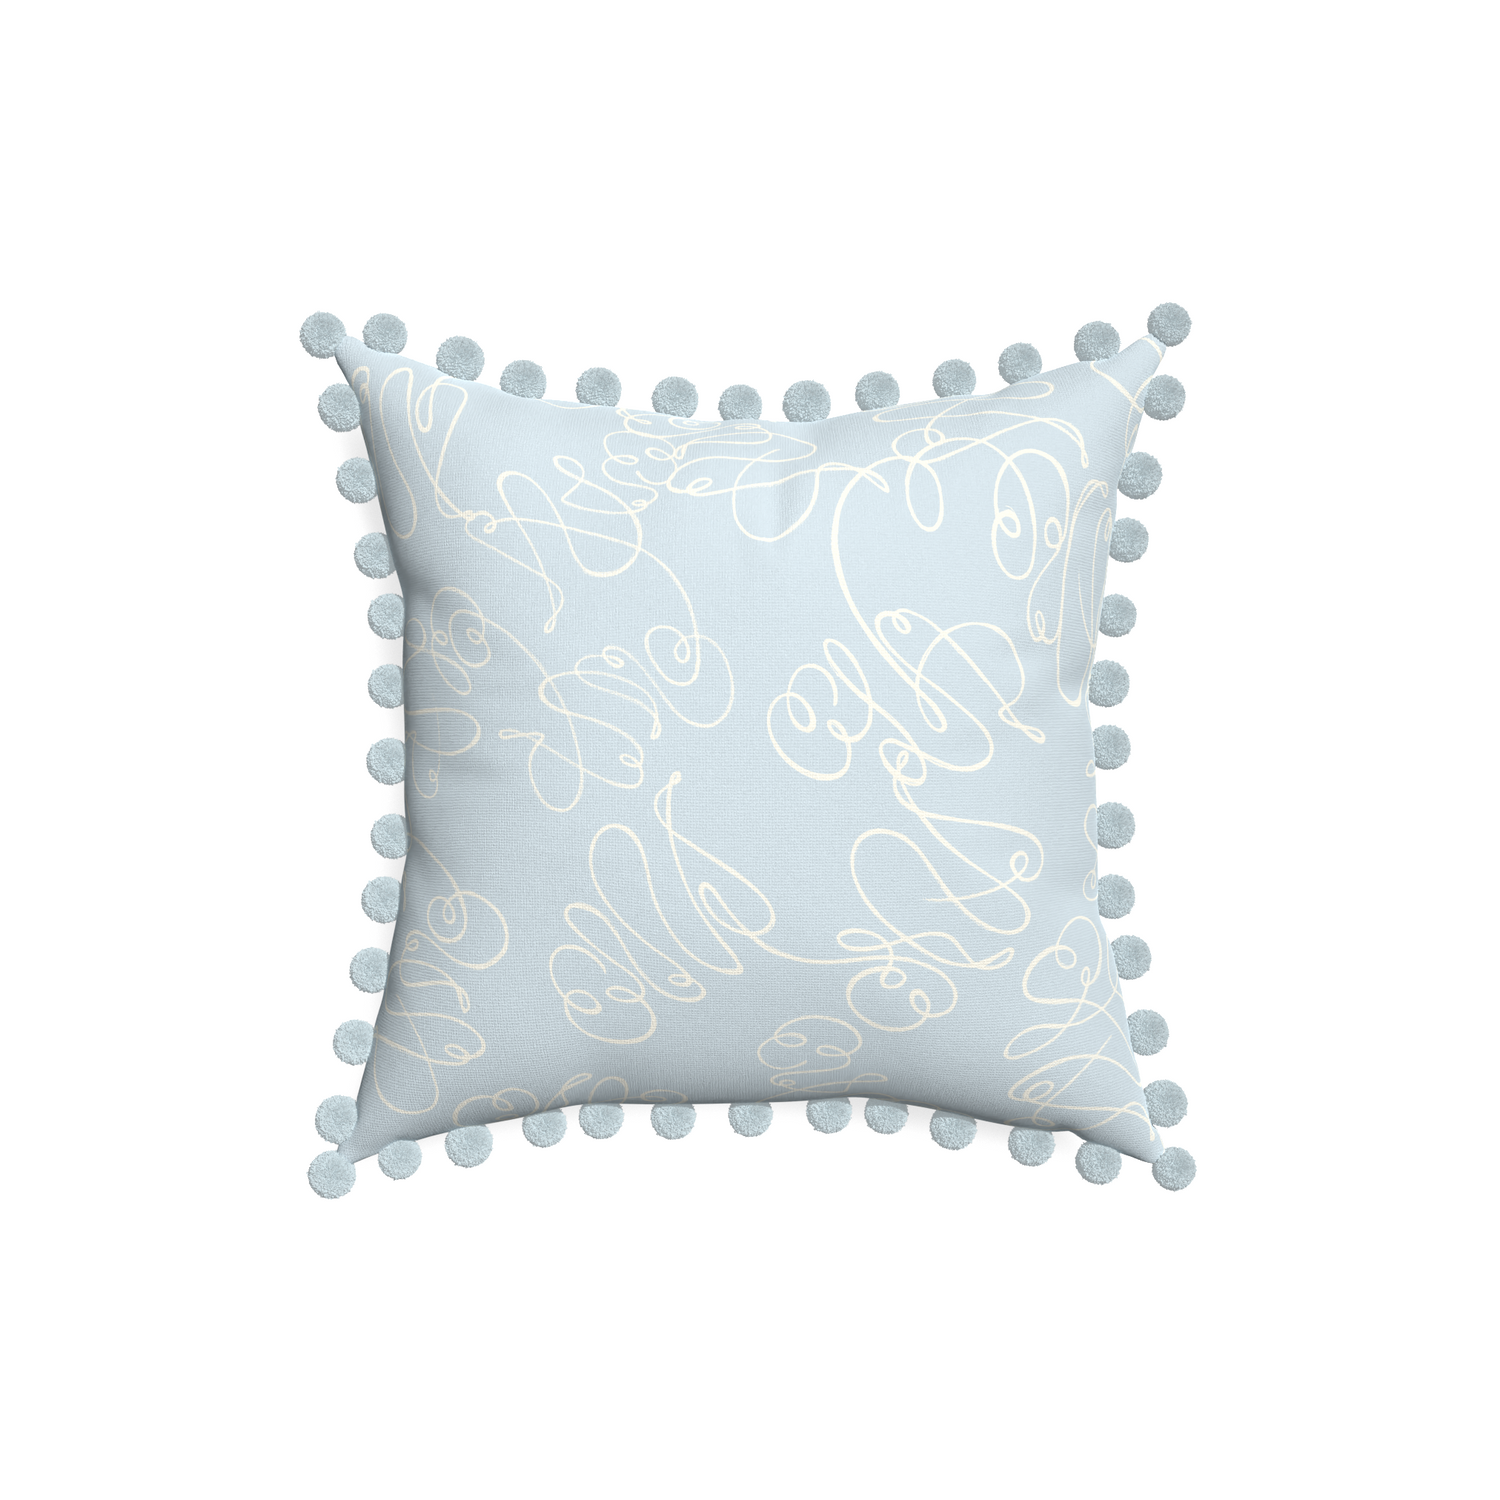 18-square mirabella custom powder blue abstractpillow with powder pom pom on white background